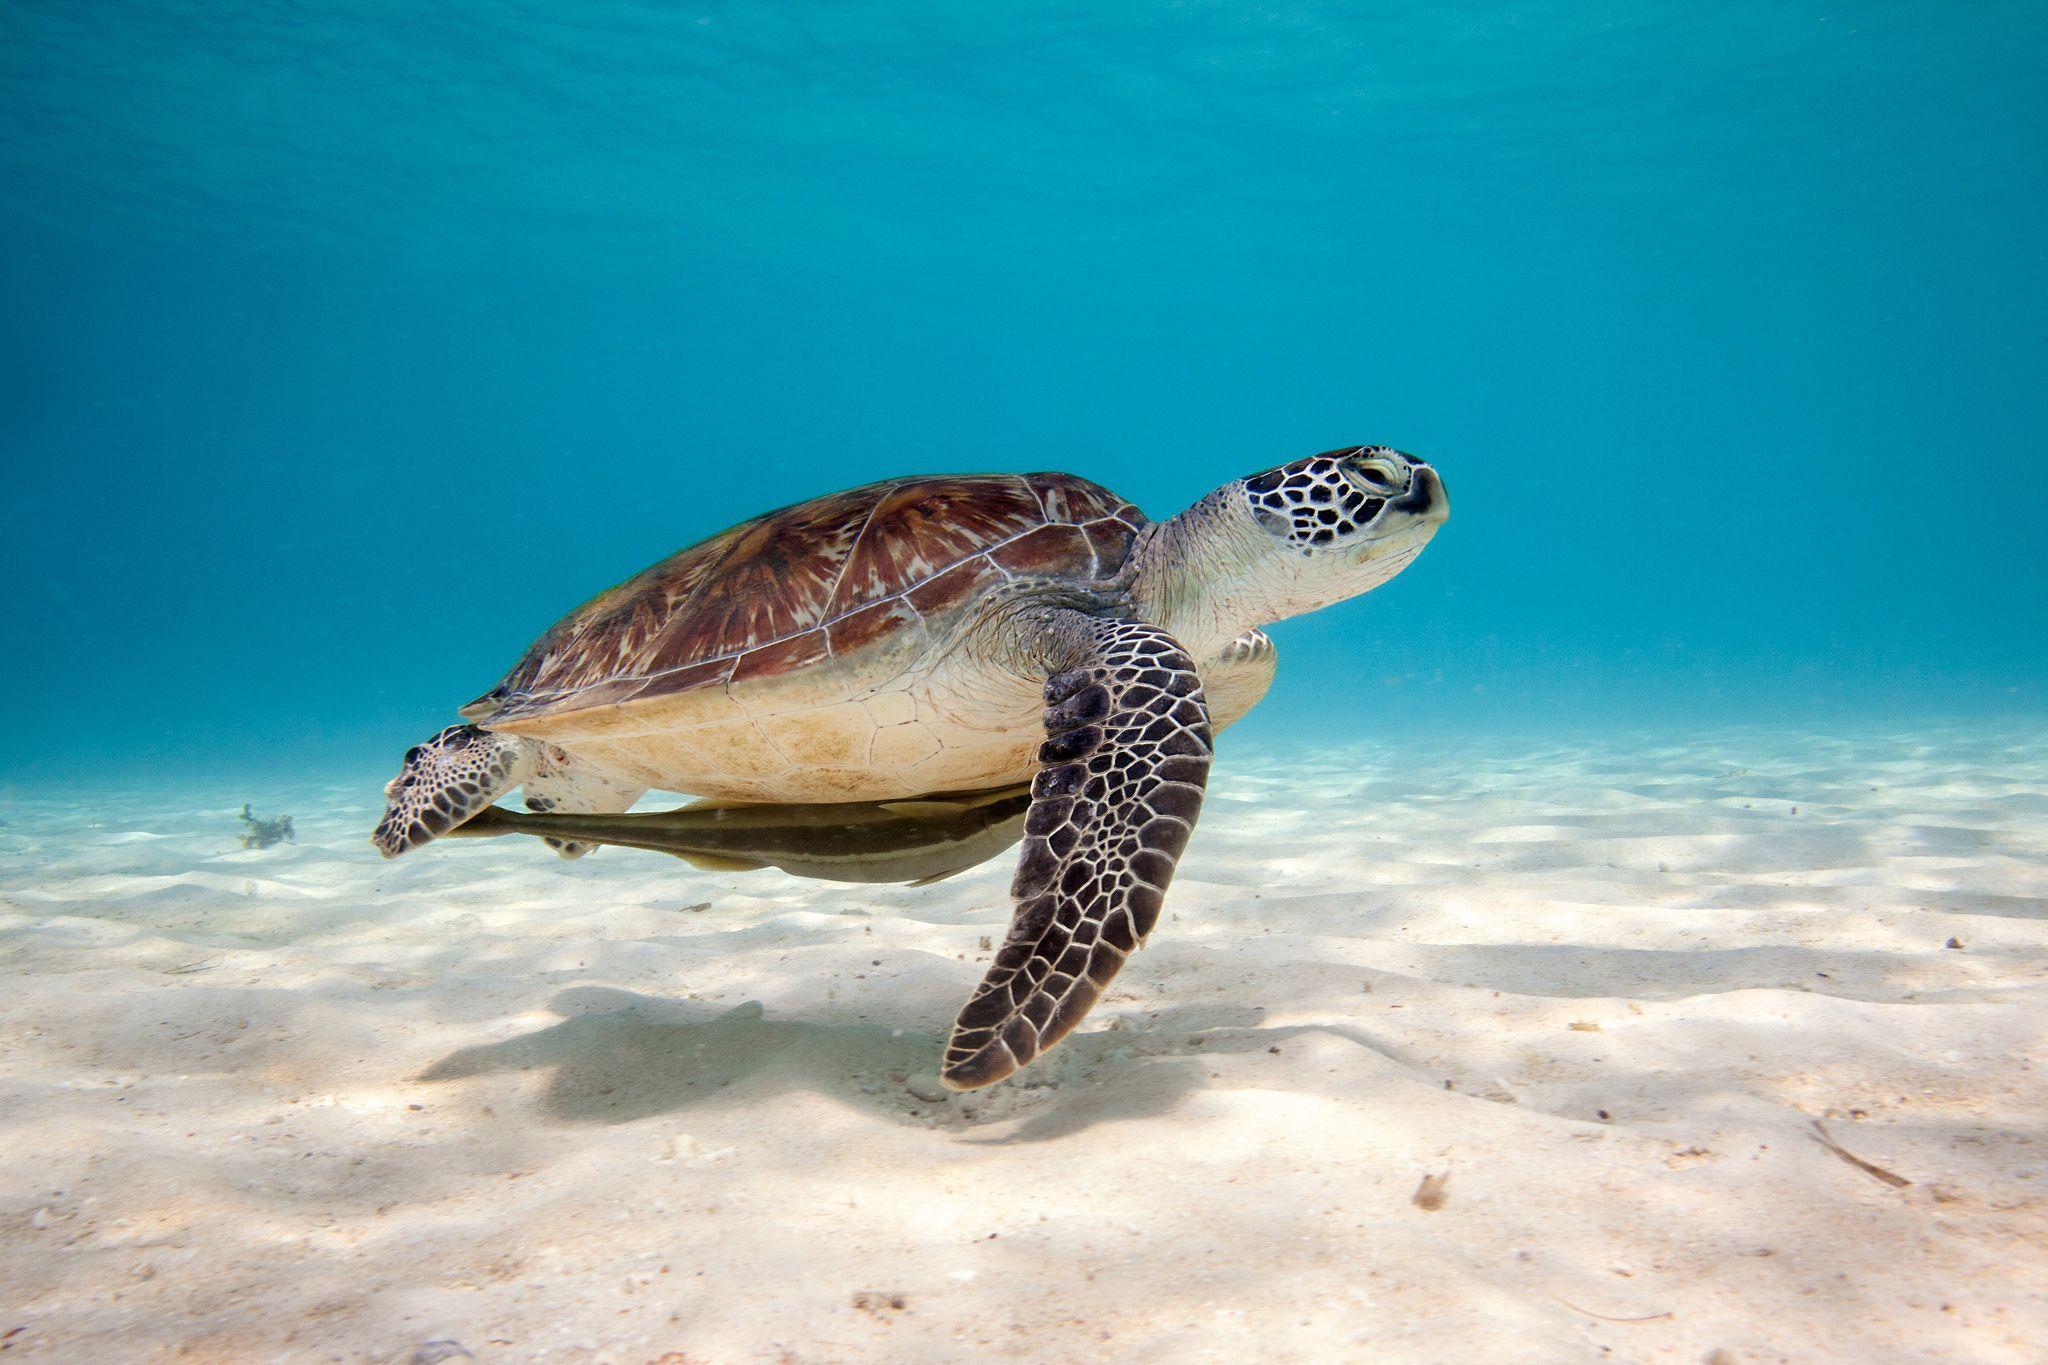 Turtle underwater HD Wallpaper Picture Photo Image